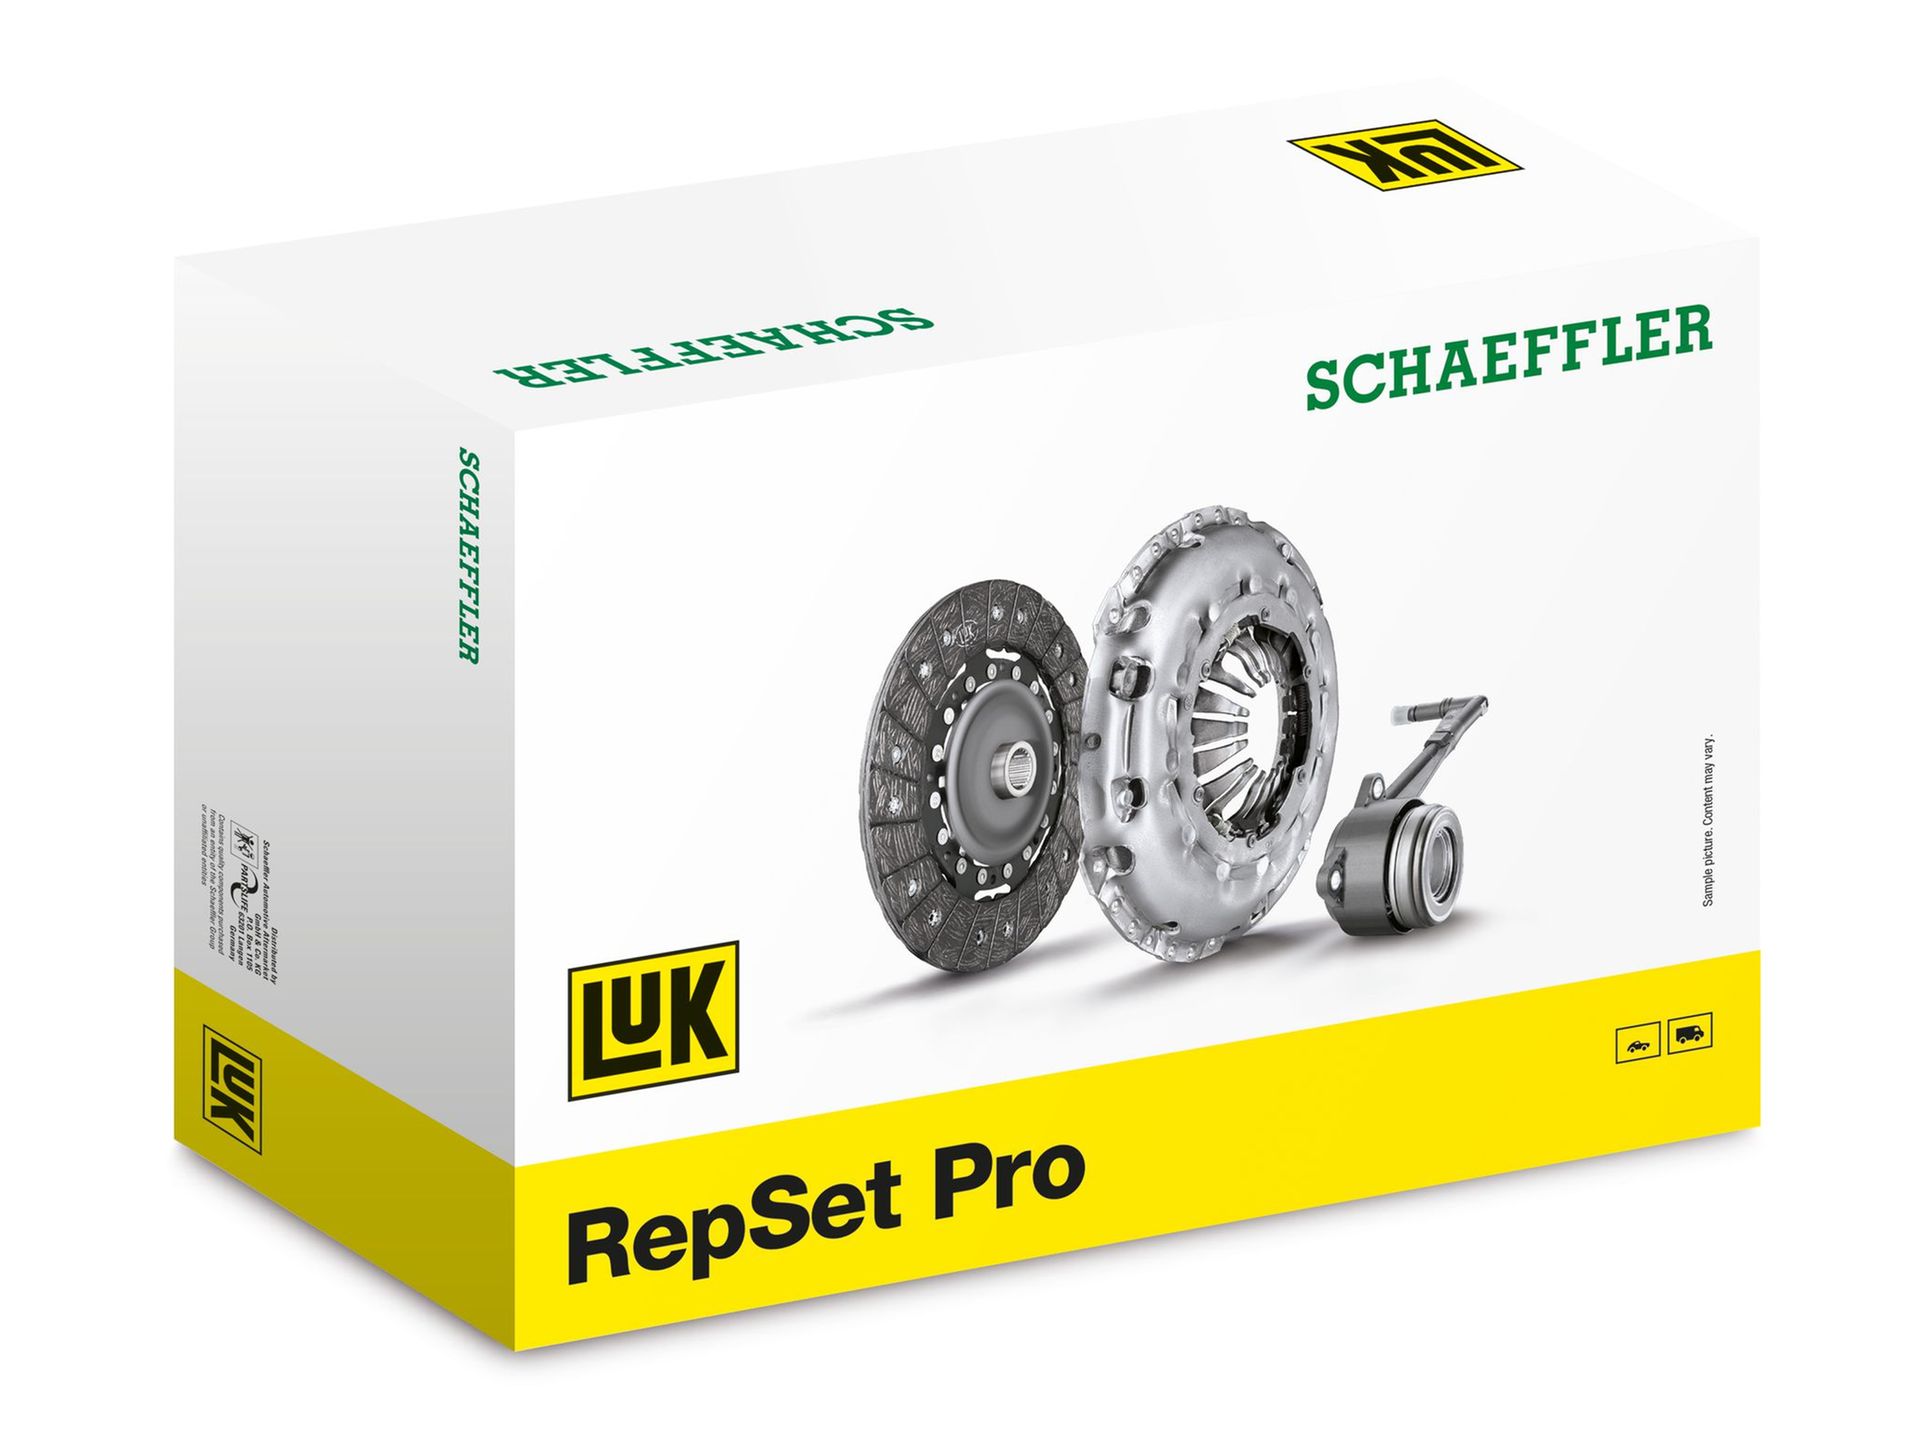 LuK RepSet - The repair solution for the manual clutch